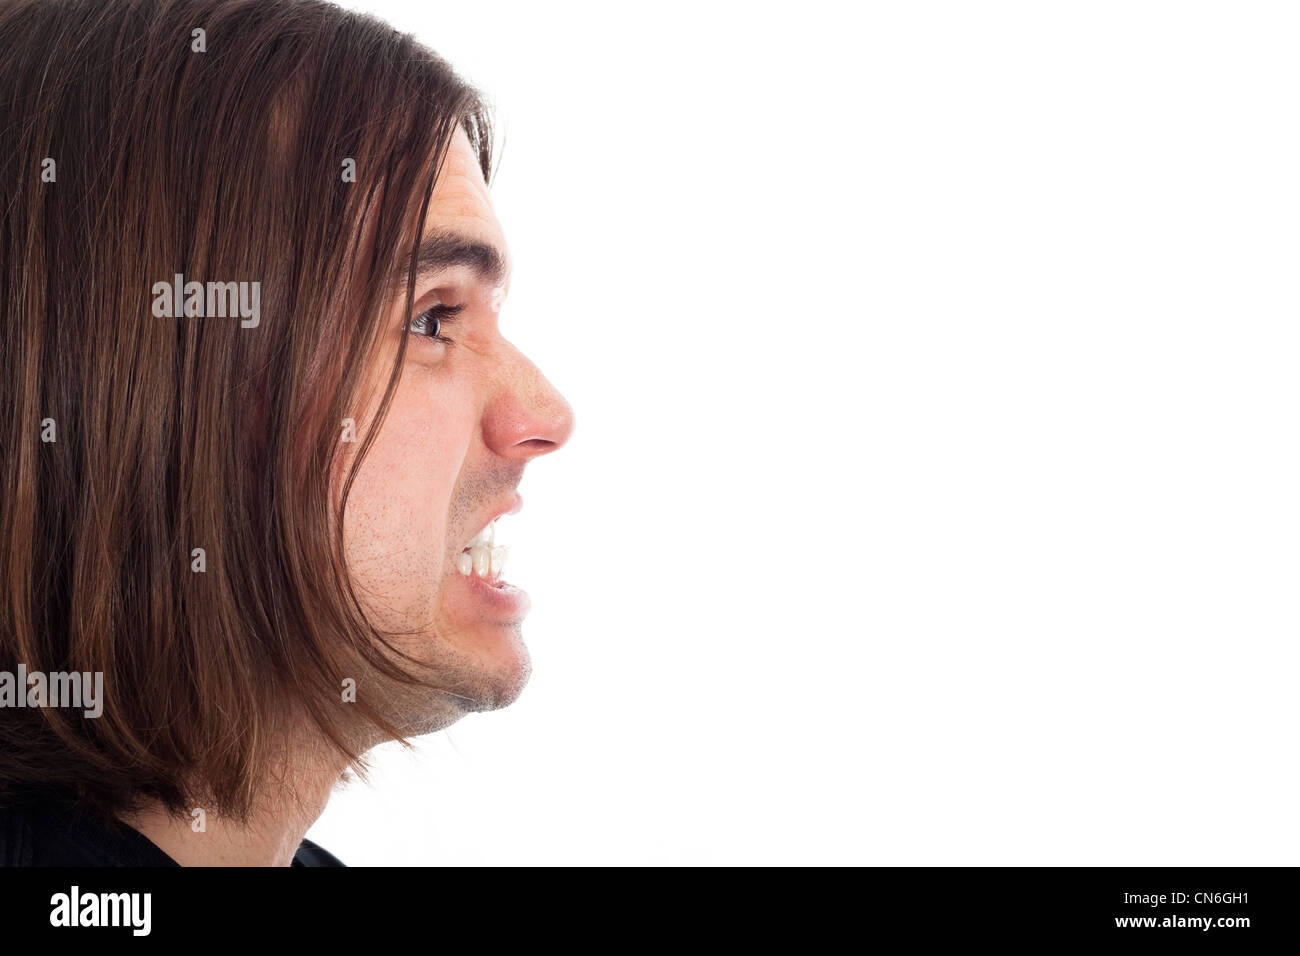 Profile of young long haired man face shouting, isolated on white background with large copy space. Stock Photo